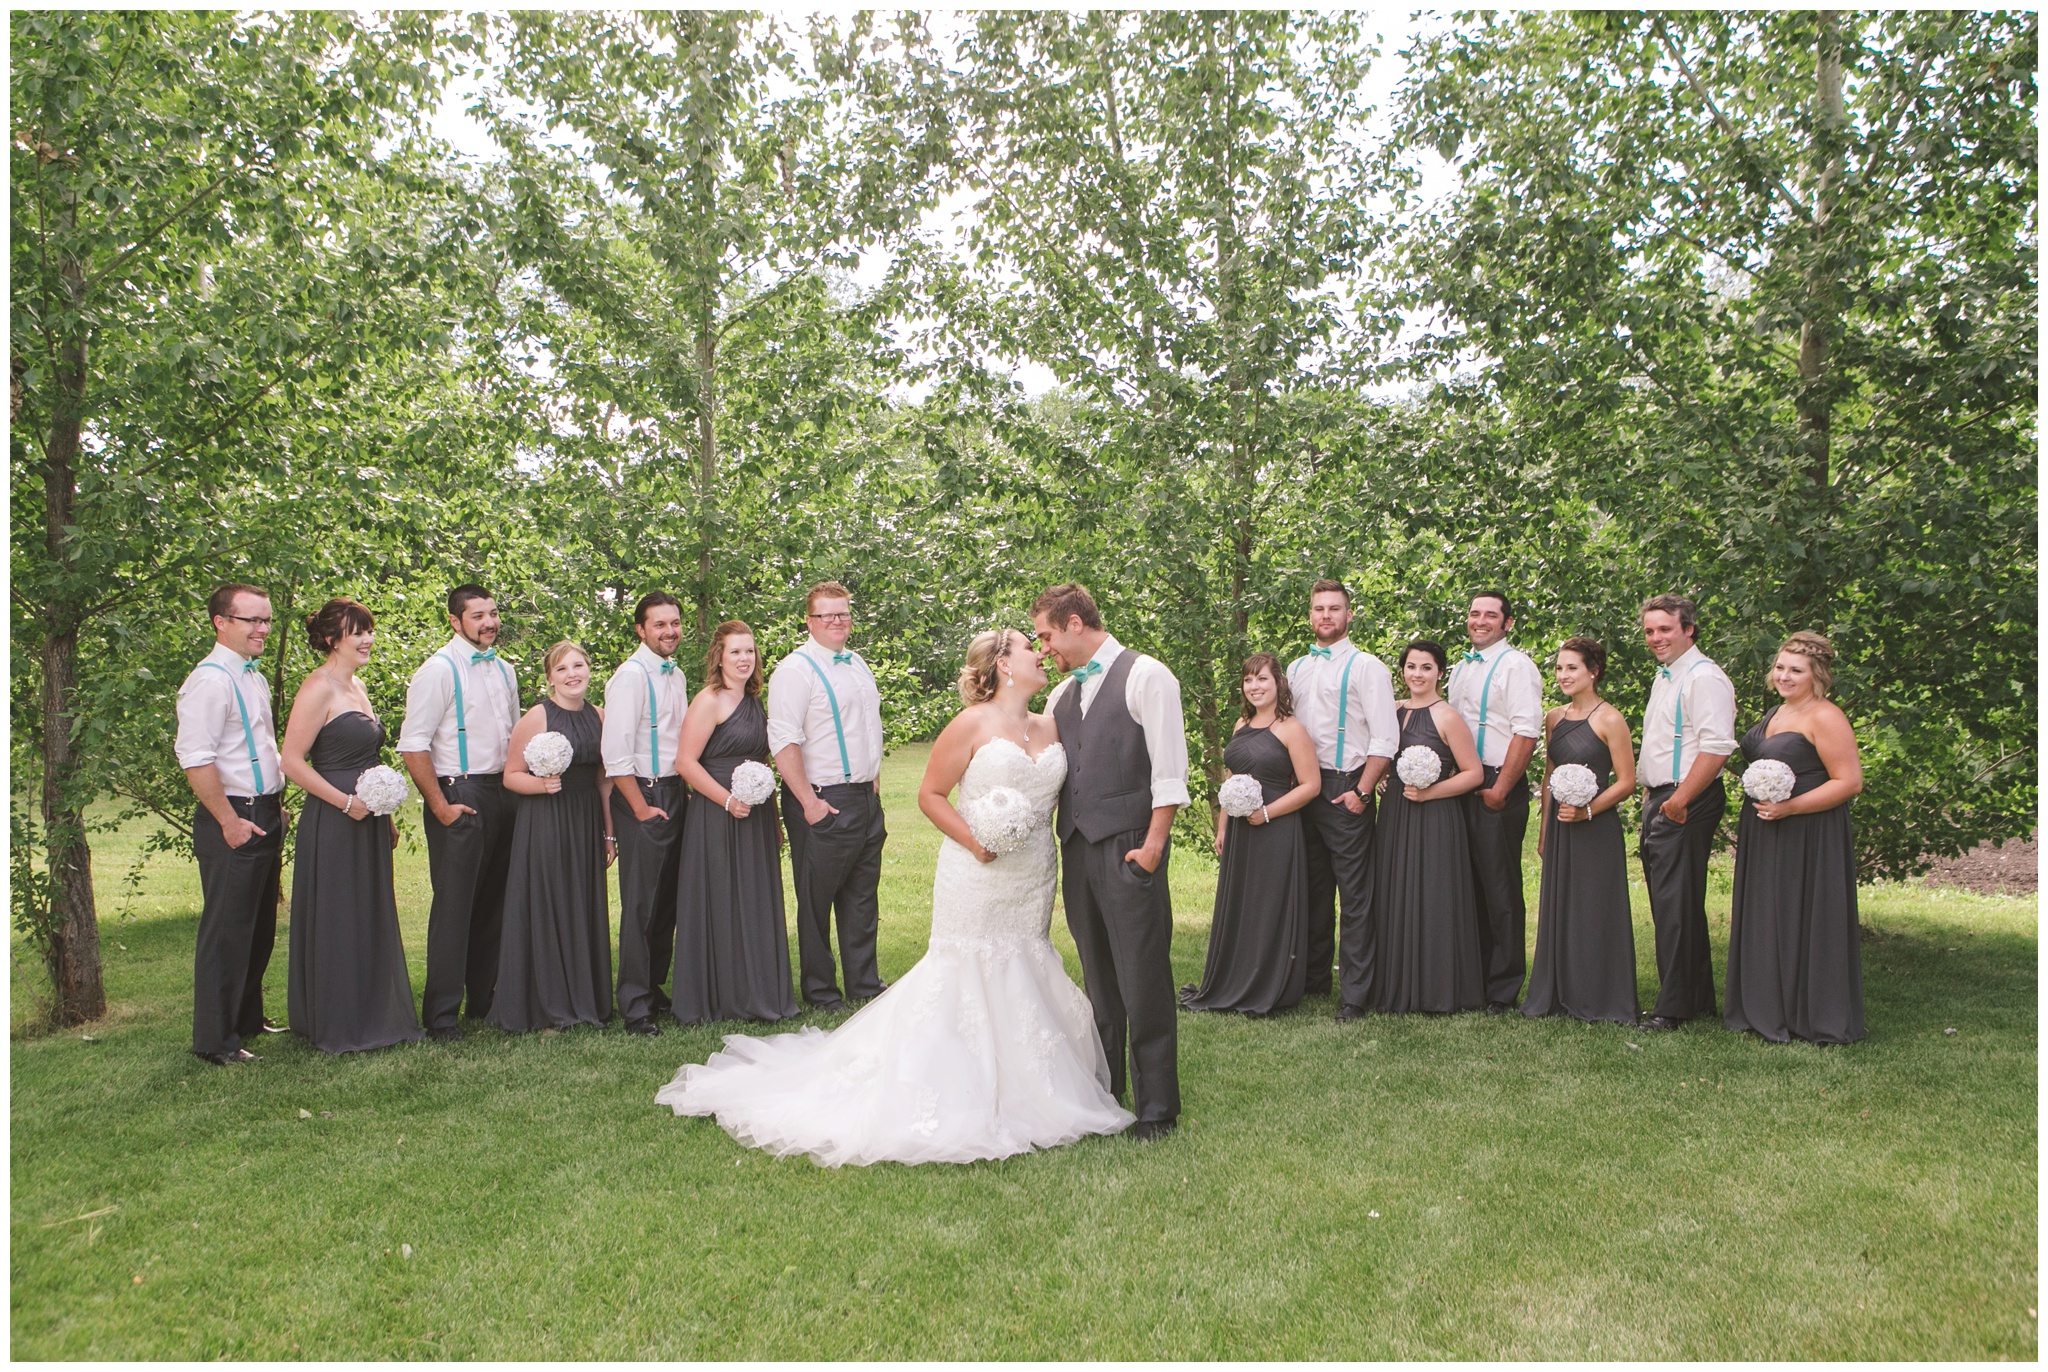 How to pose a large wedding party photo